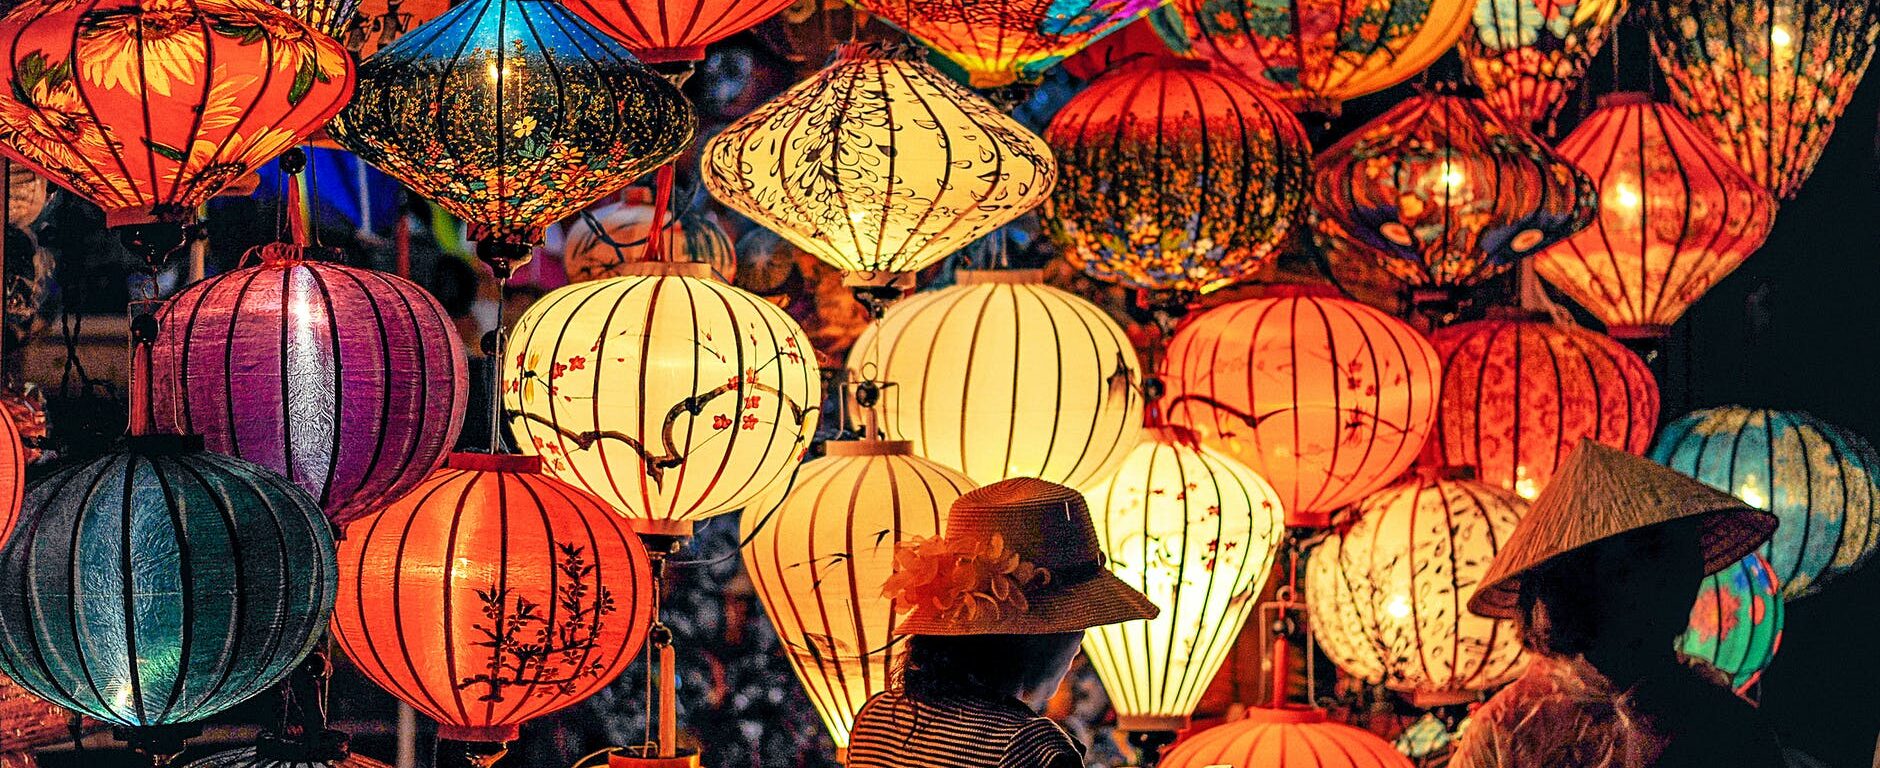 two person standing near assorted color paper lanterns